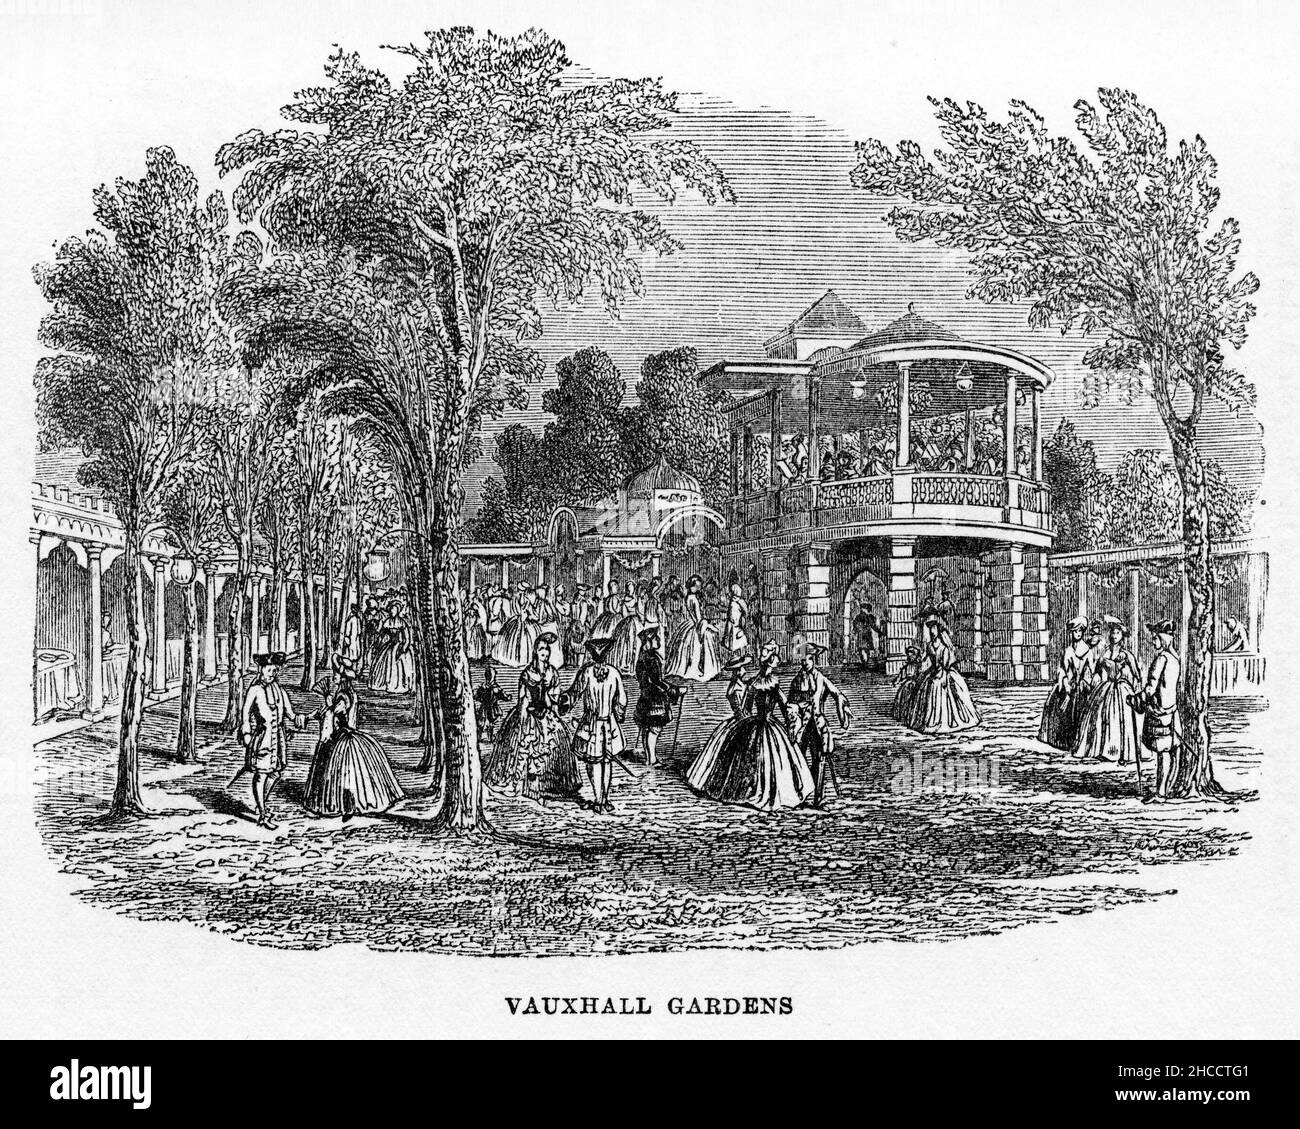 Engraving of Vauxhall Gardens, a scene from a Victorian era book by Charles Dickens, published circa 1908 Stock Photo